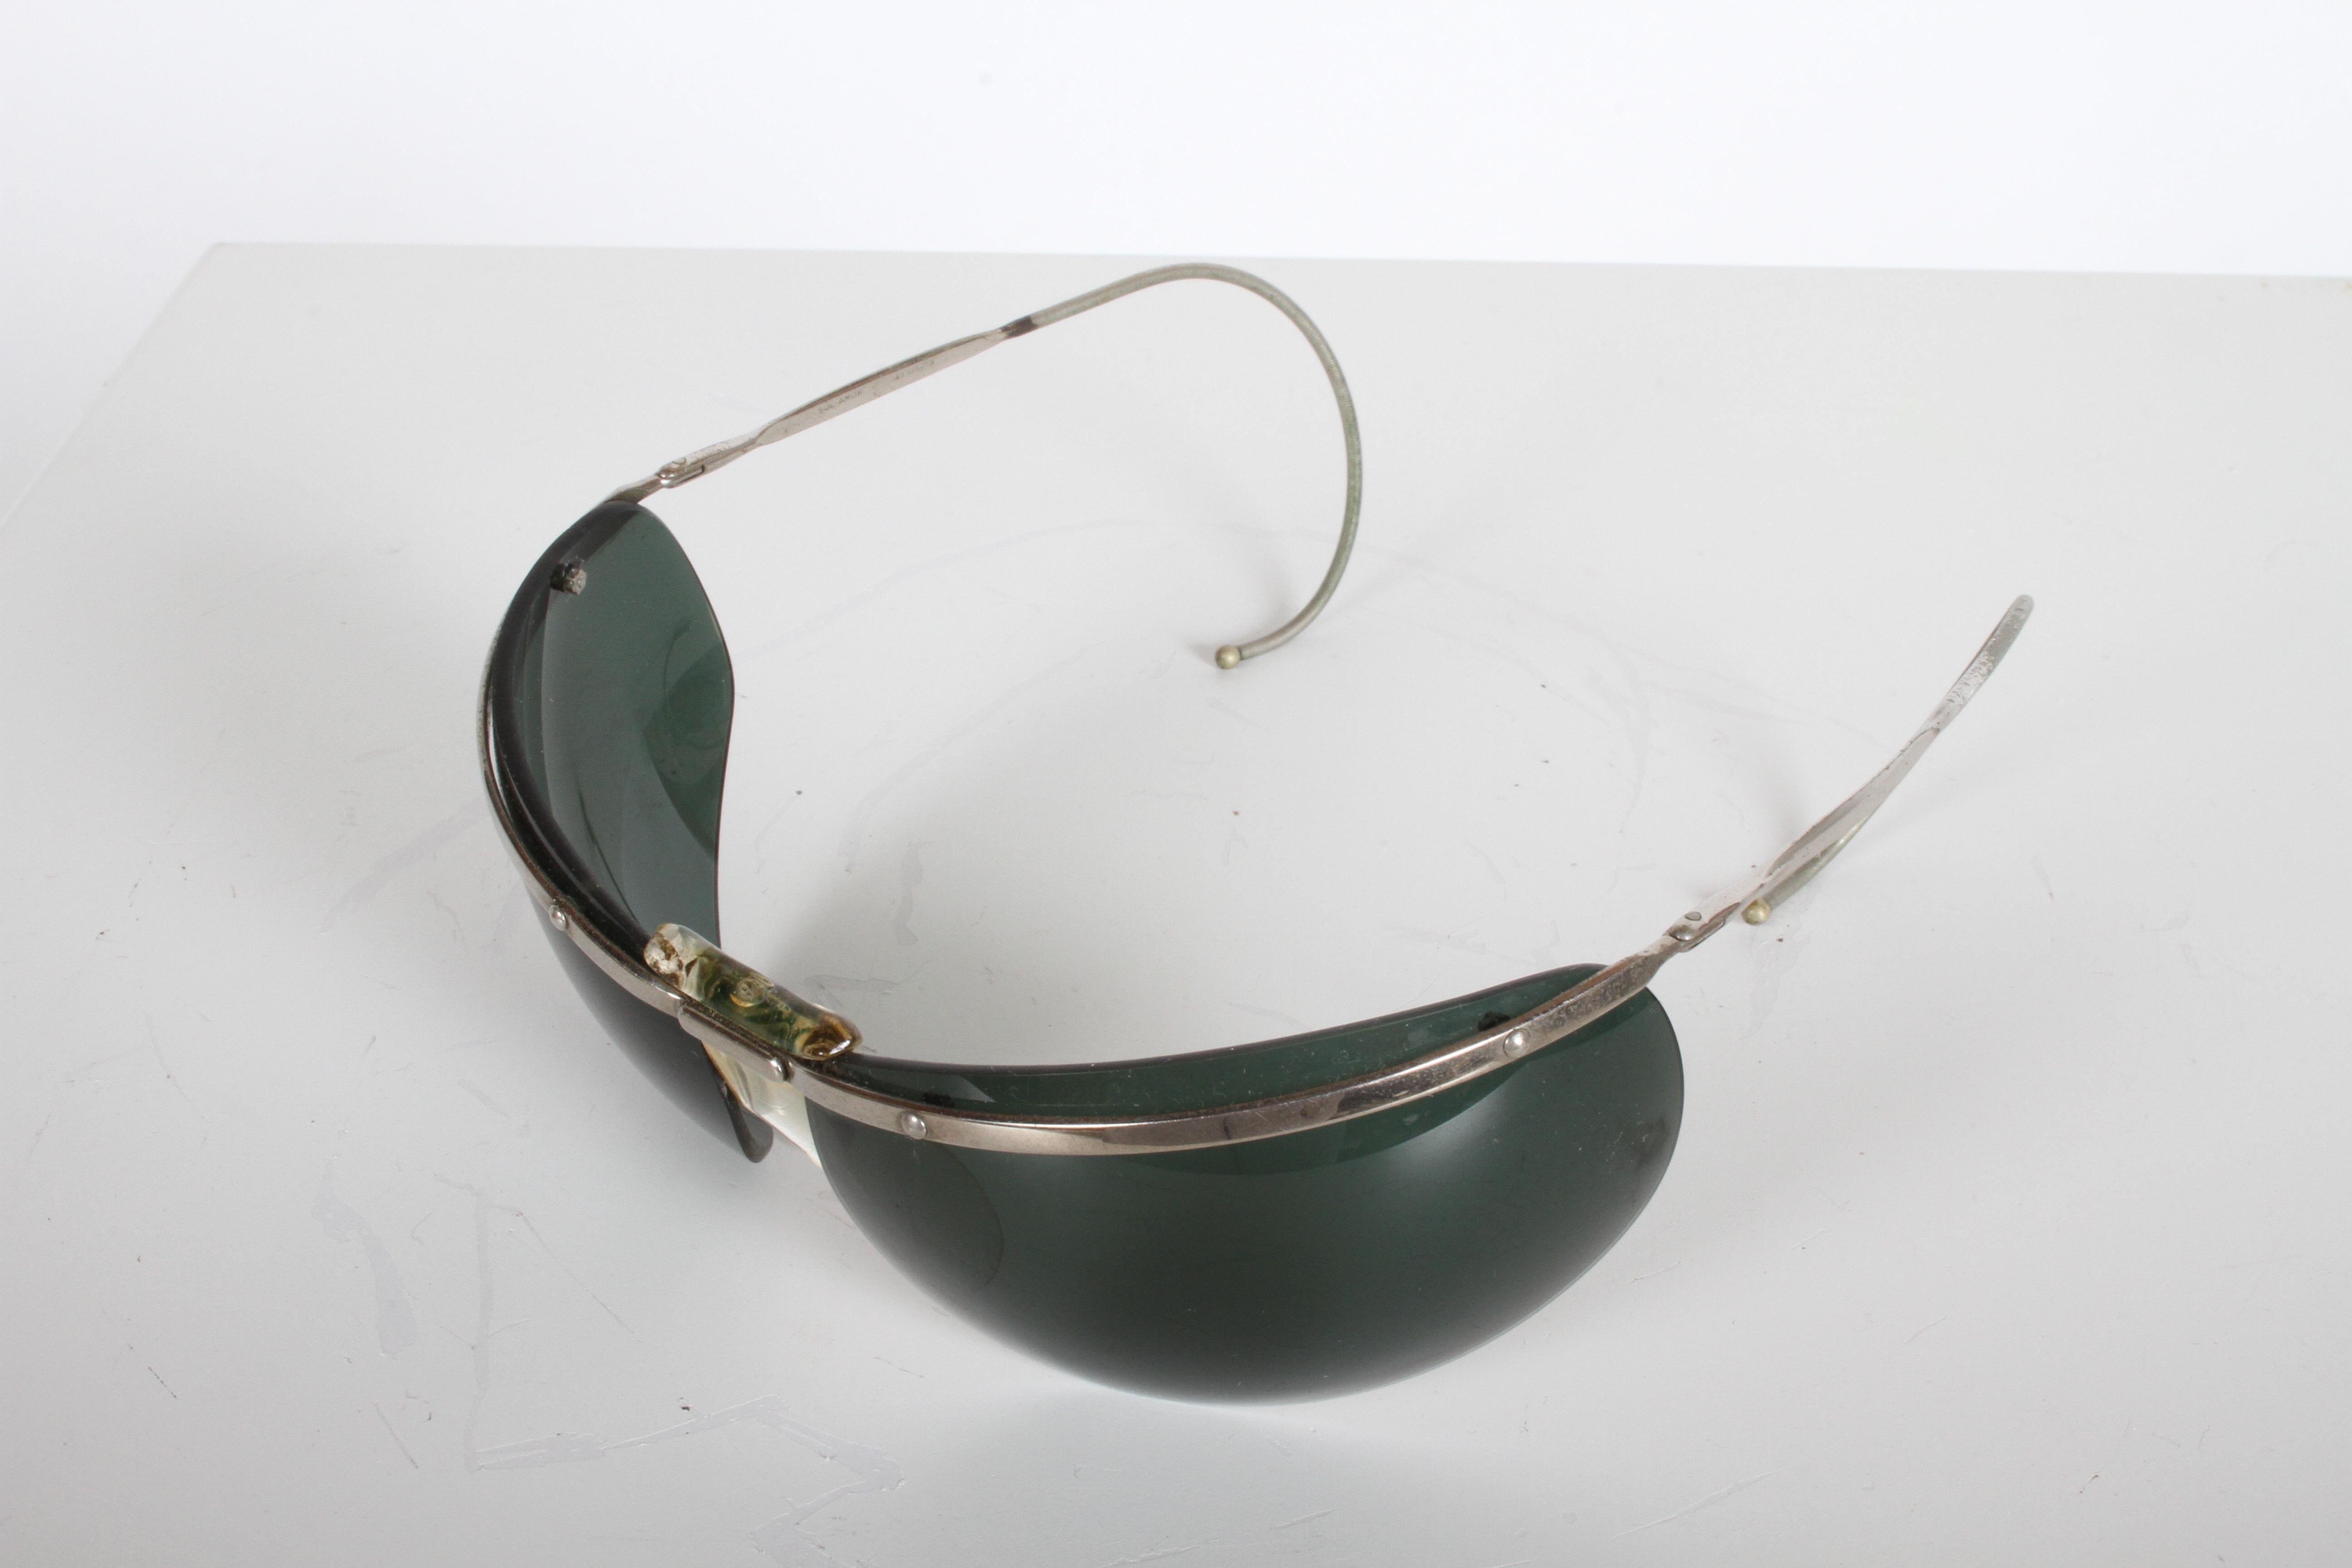 French Rare Sport Wraparound 1960s Vintage Sunglasses by Sol-Amor France, Green Lenses